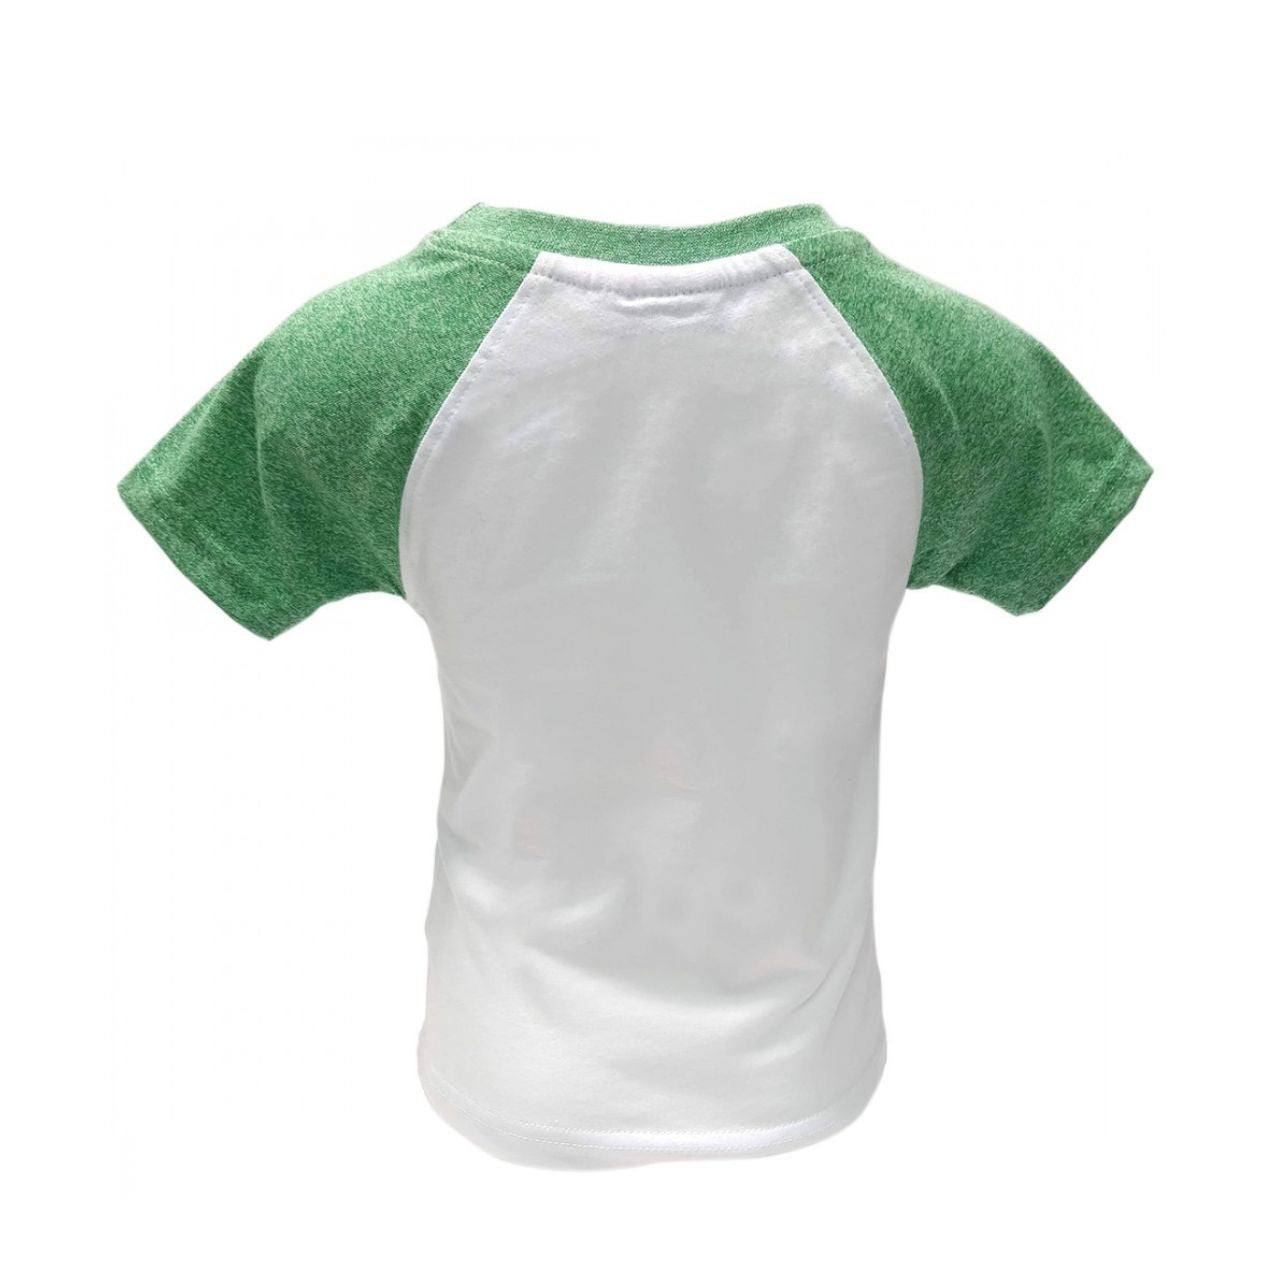 White & Green Grindle Irish Eyes Raglan Kids T-shirt  This white and green grindle kids T-shirt is part of the Traditional Craft Official Collection. This raglan style T-shirt is a relaxed fit and features embroidered shamrocks and wording over print. The classic phrase reads "When Irish eyes are smiling".